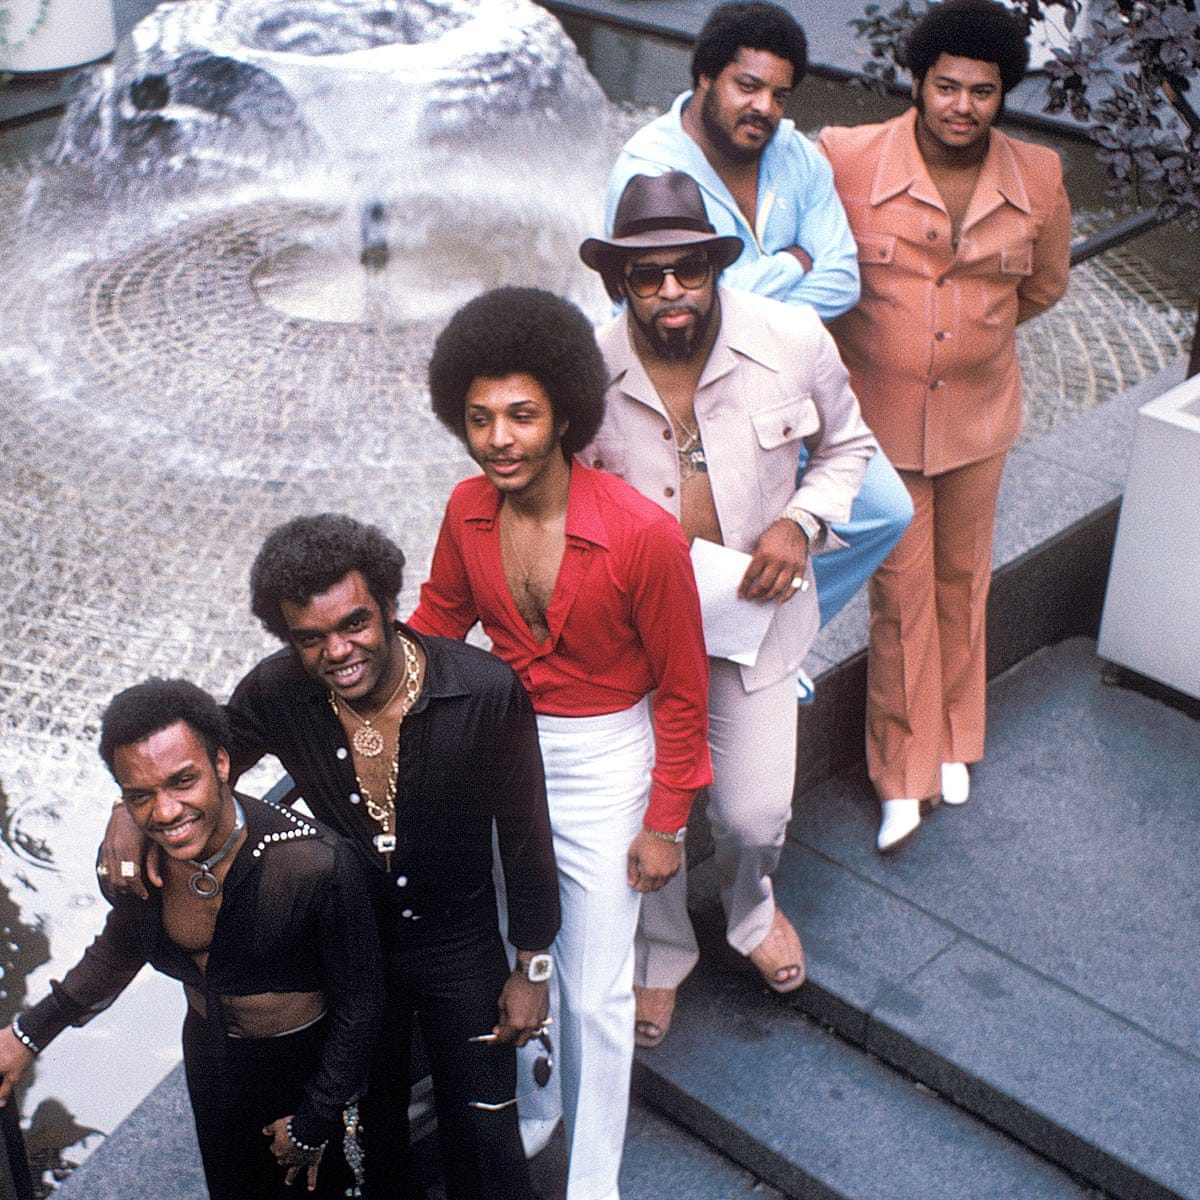 The Isley Brothers: 'Our music is so much more than Shout' – a classic  interview from the vaults | Music | The Guardian